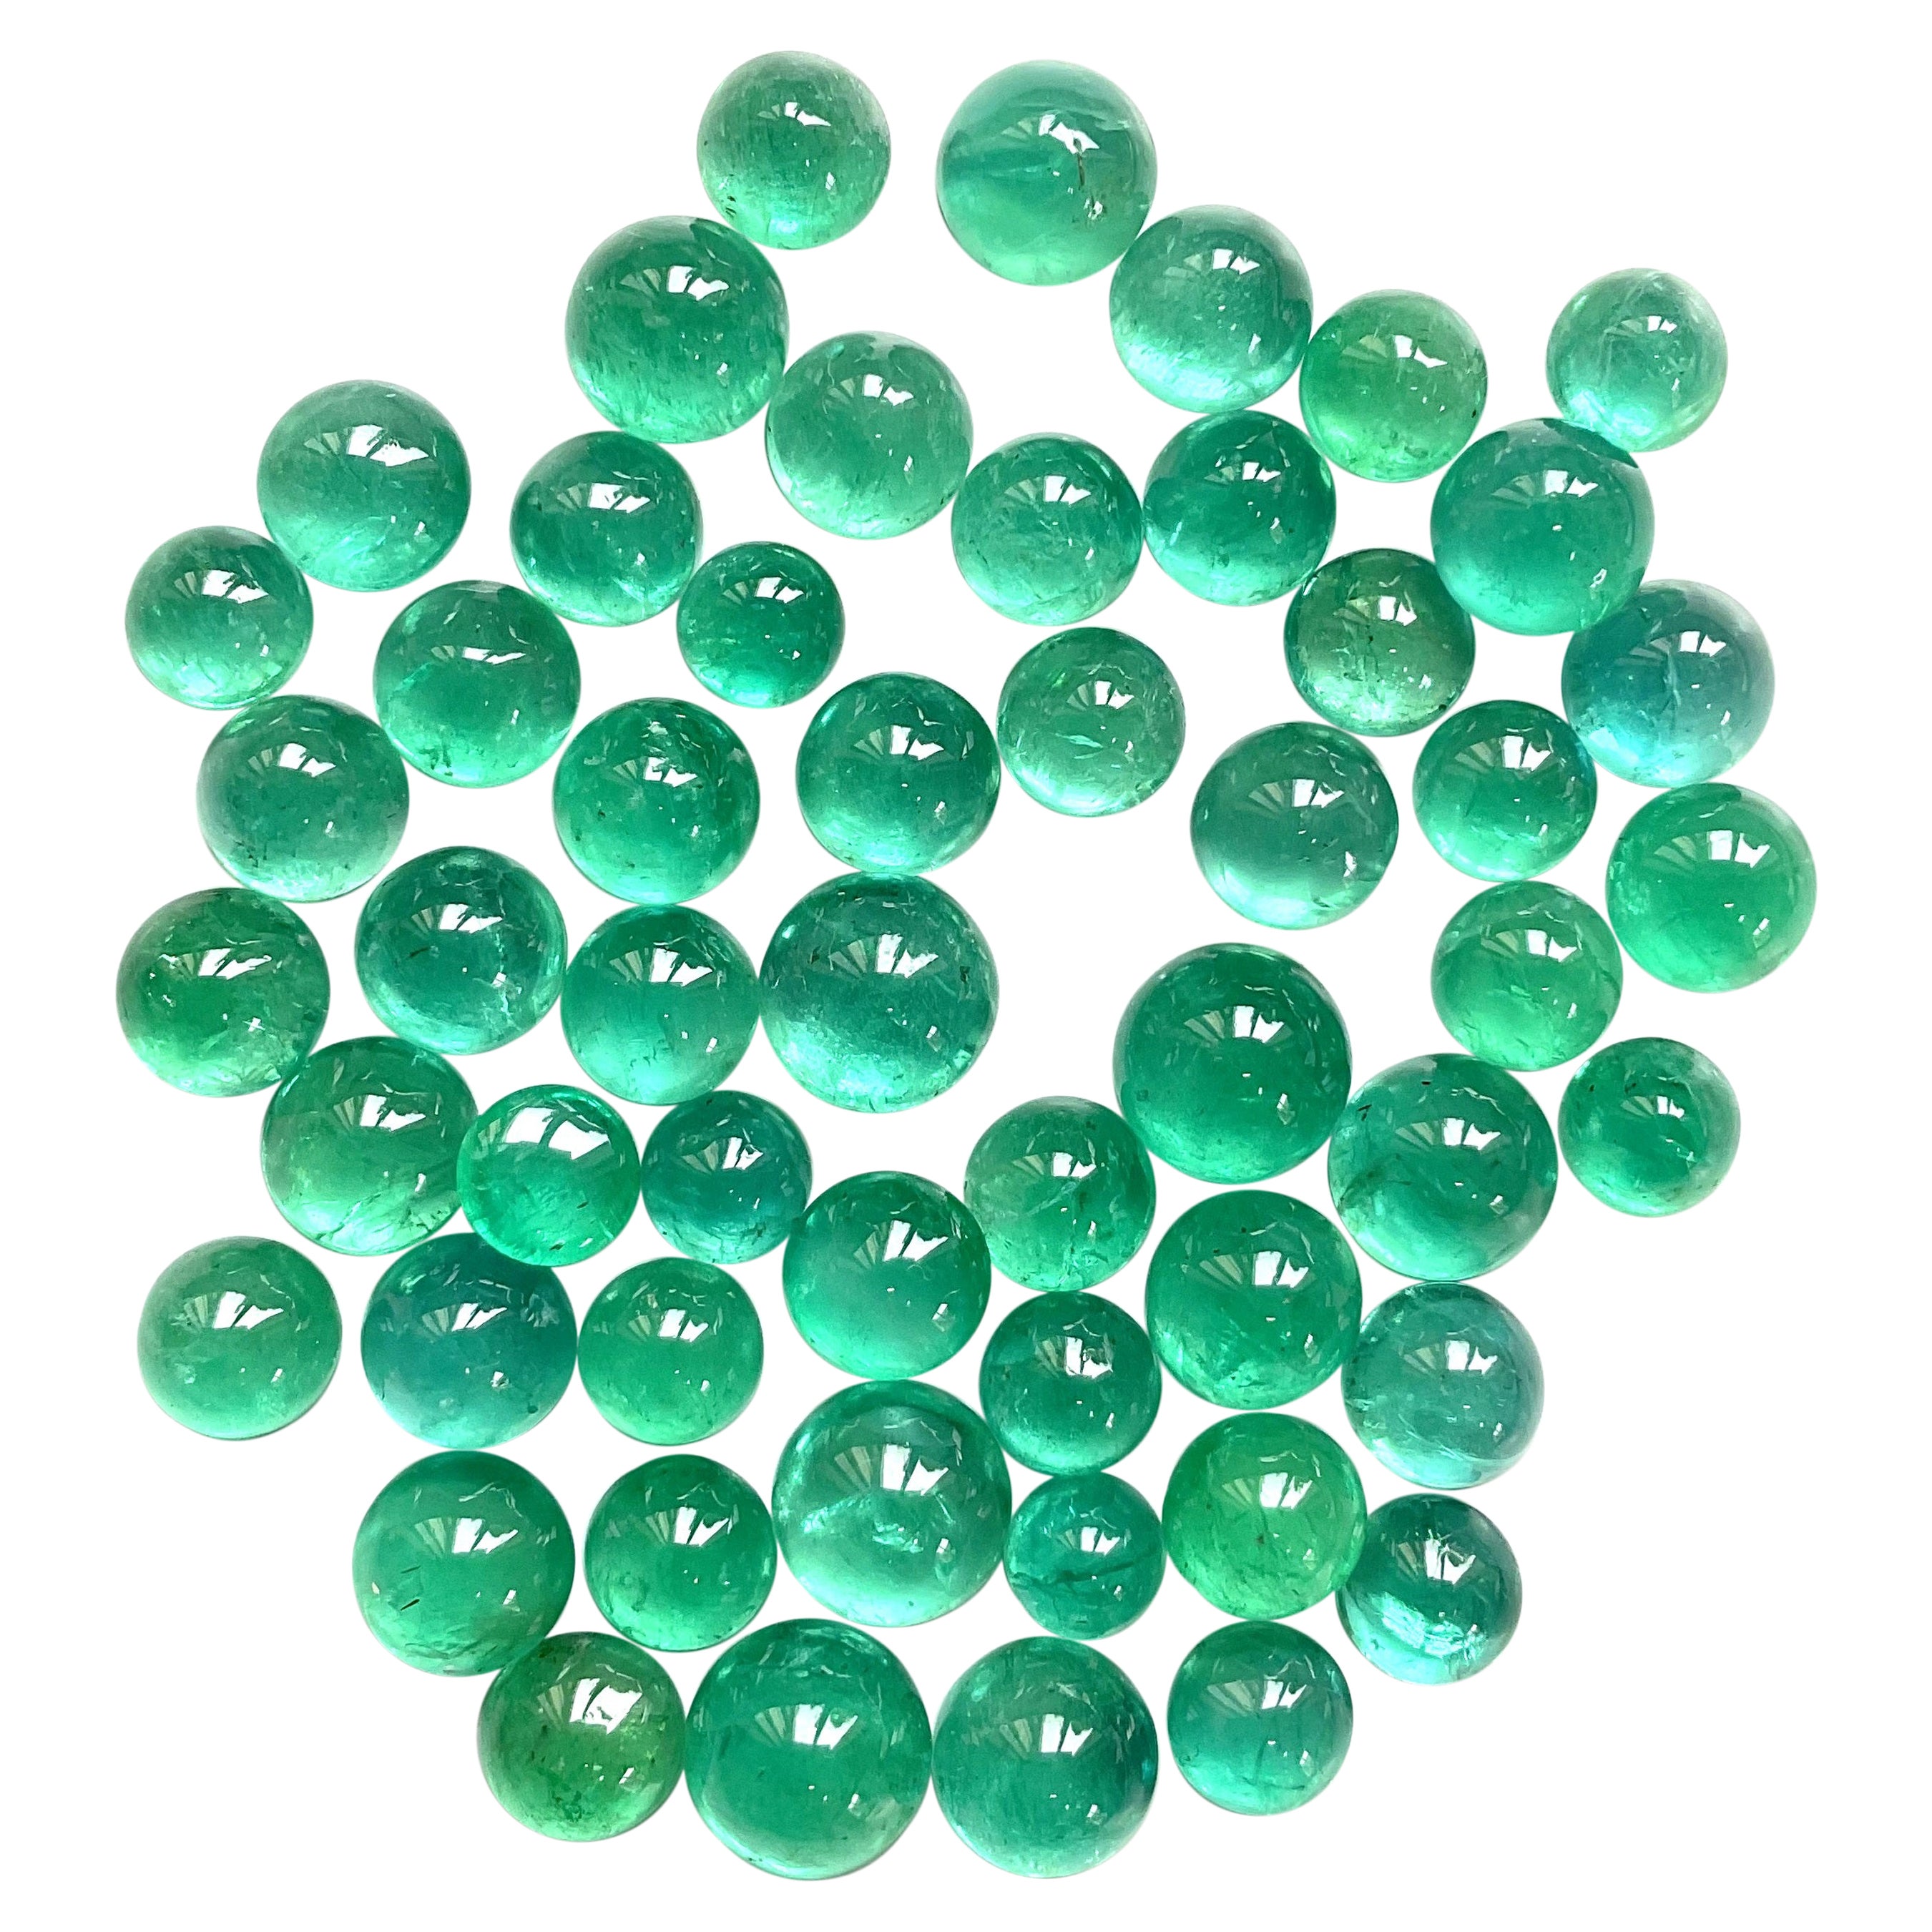 111.00 carats Zambian Emerald Round Plain Cabs Top Quality For Jewelry Gemstone  en vente